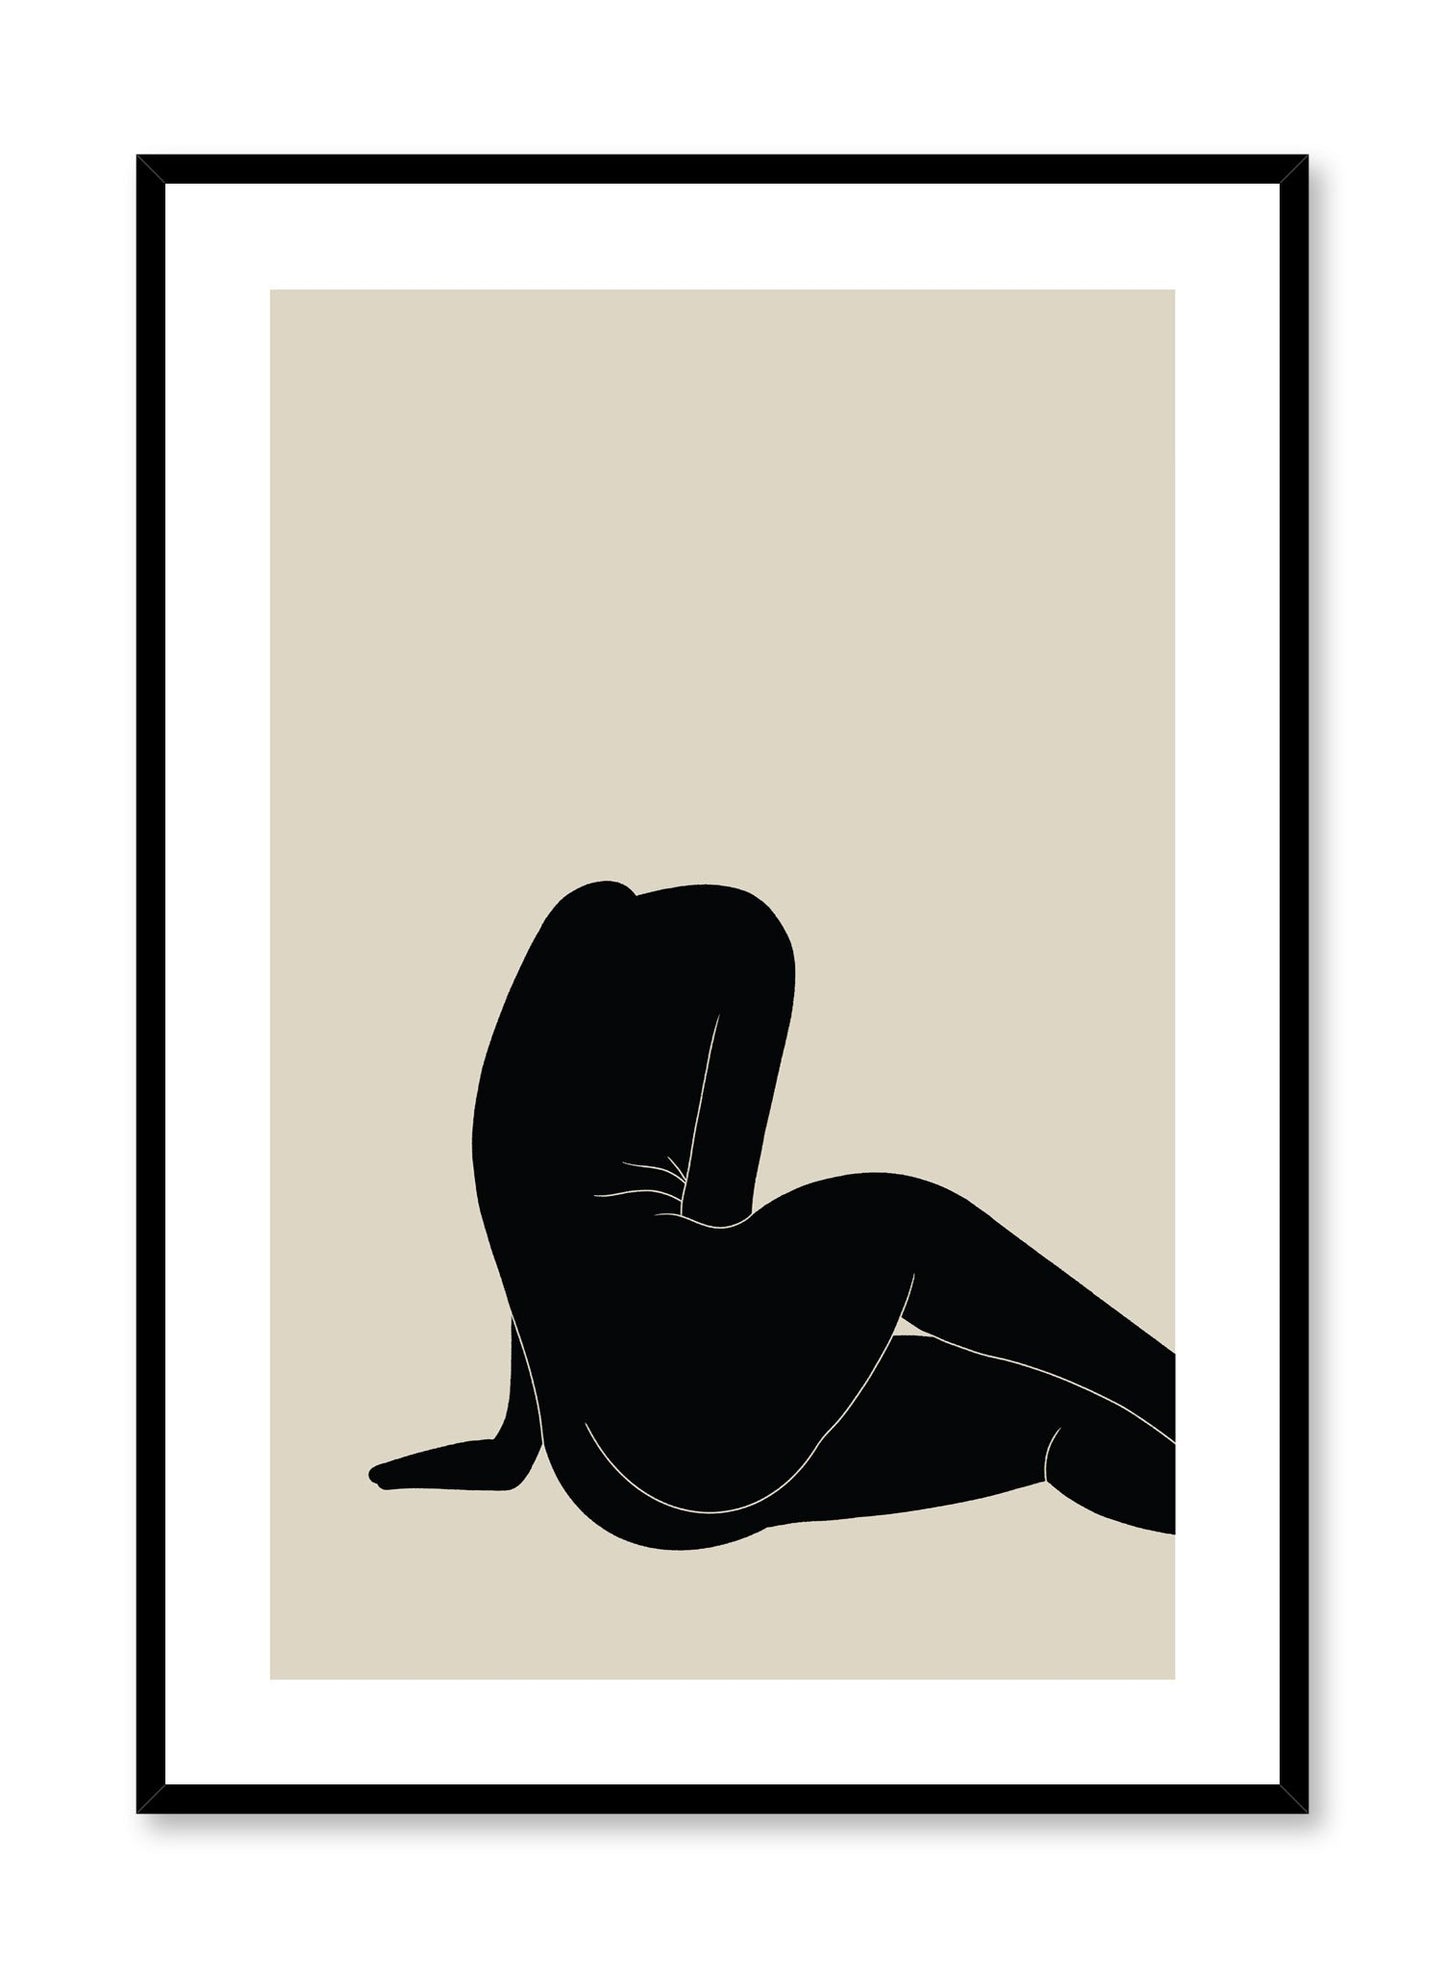 Minimalist design poster by Opposite Wall with abstract woman sitting